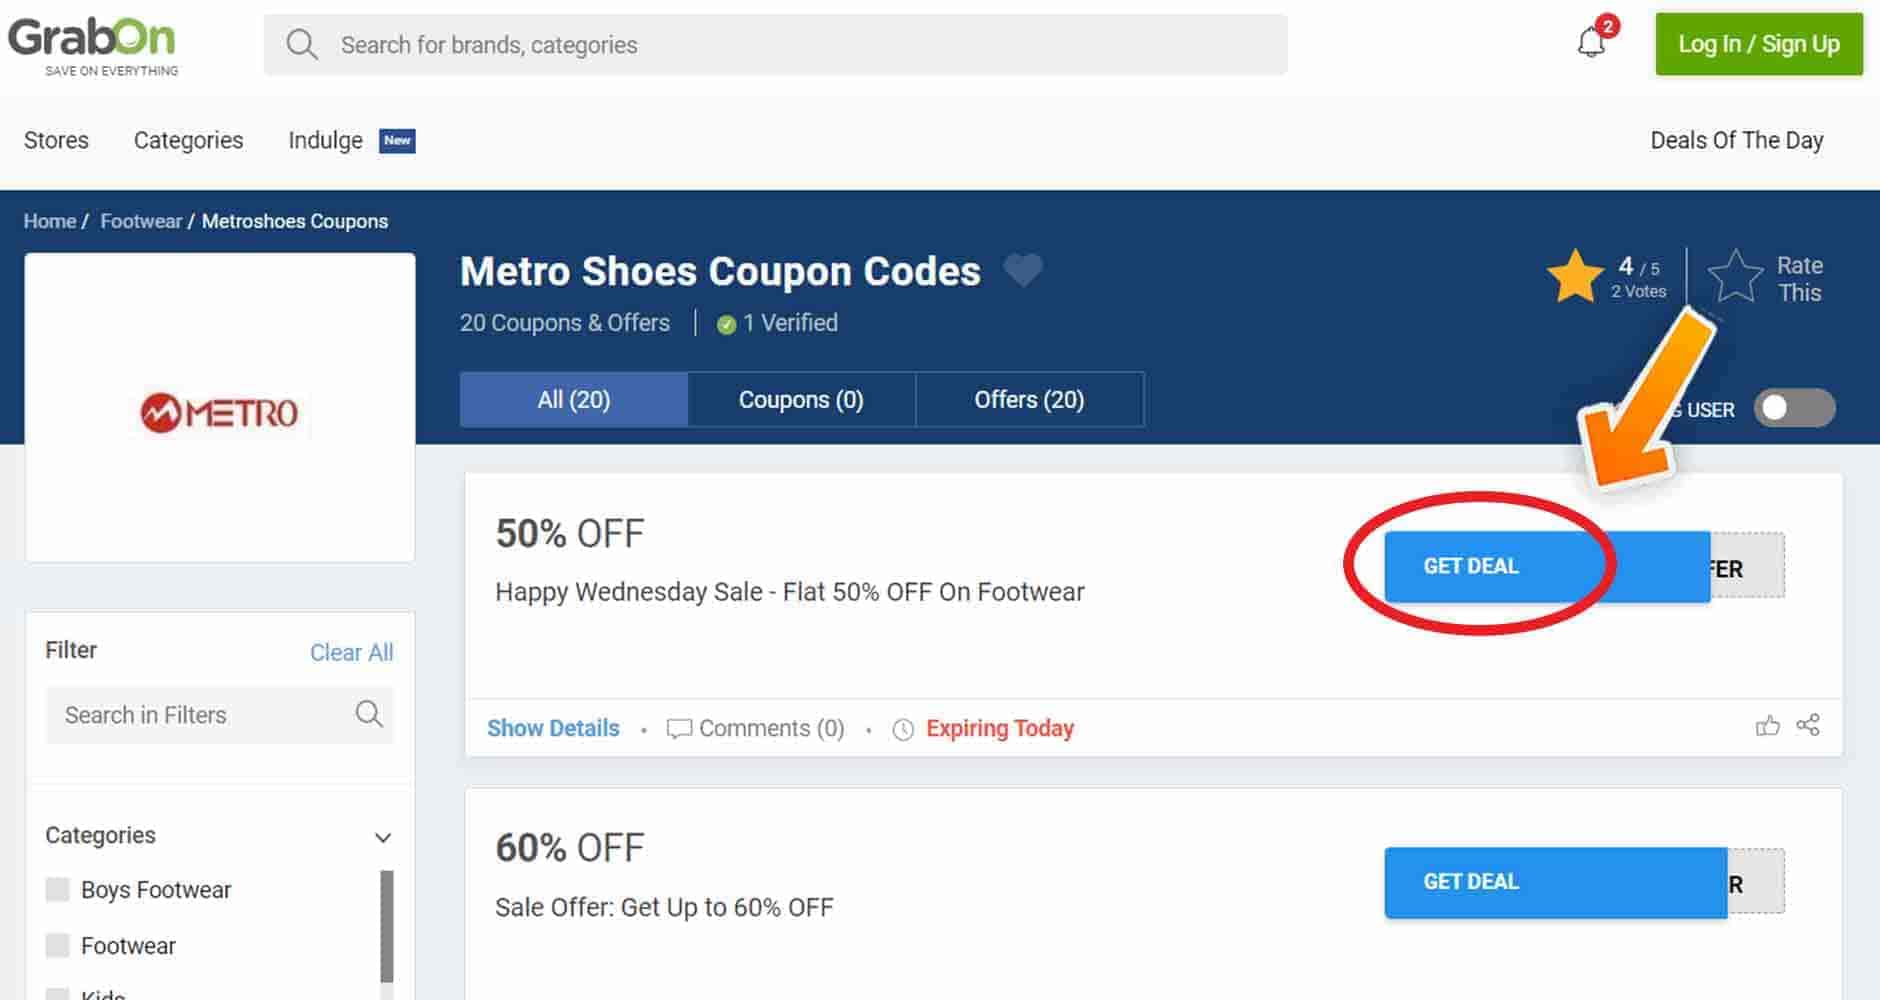 Metroshoes Coupons